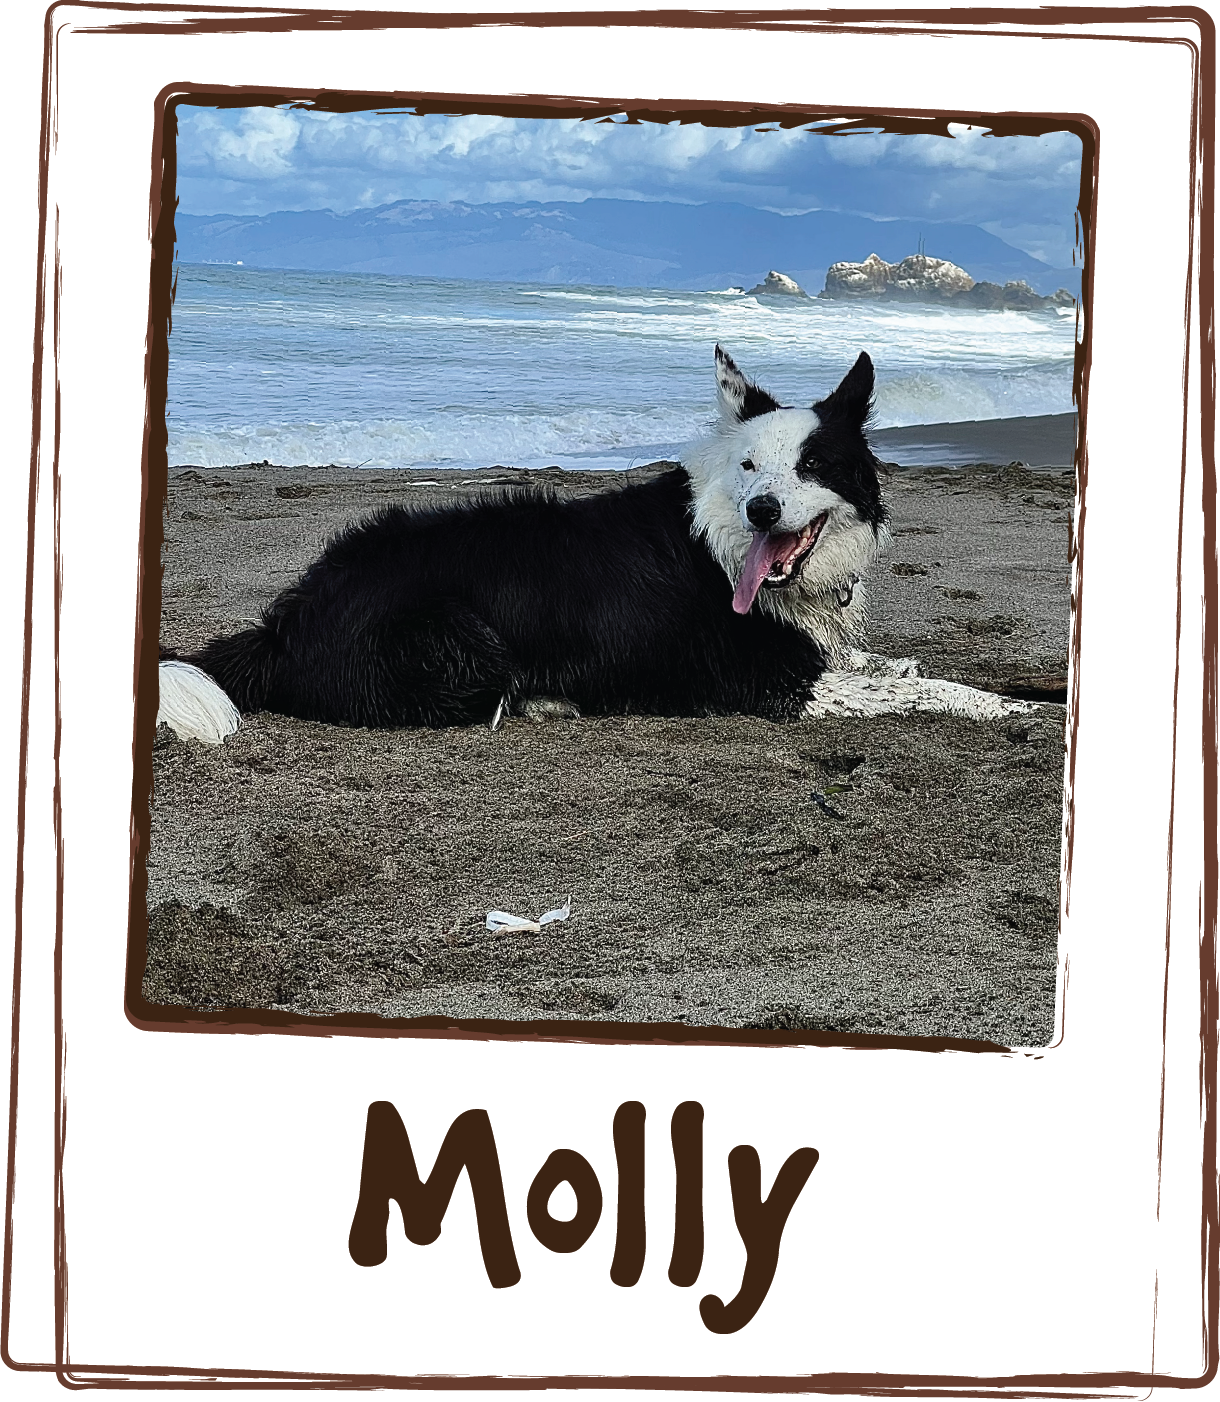  “We use Licks to avert/relieve Molly's symptoms from thunderstorms, fireworks and the like. The calming effect is obvious as she stops trembling, panting, nervous pacing and drooling and can lie down and relax again!” 